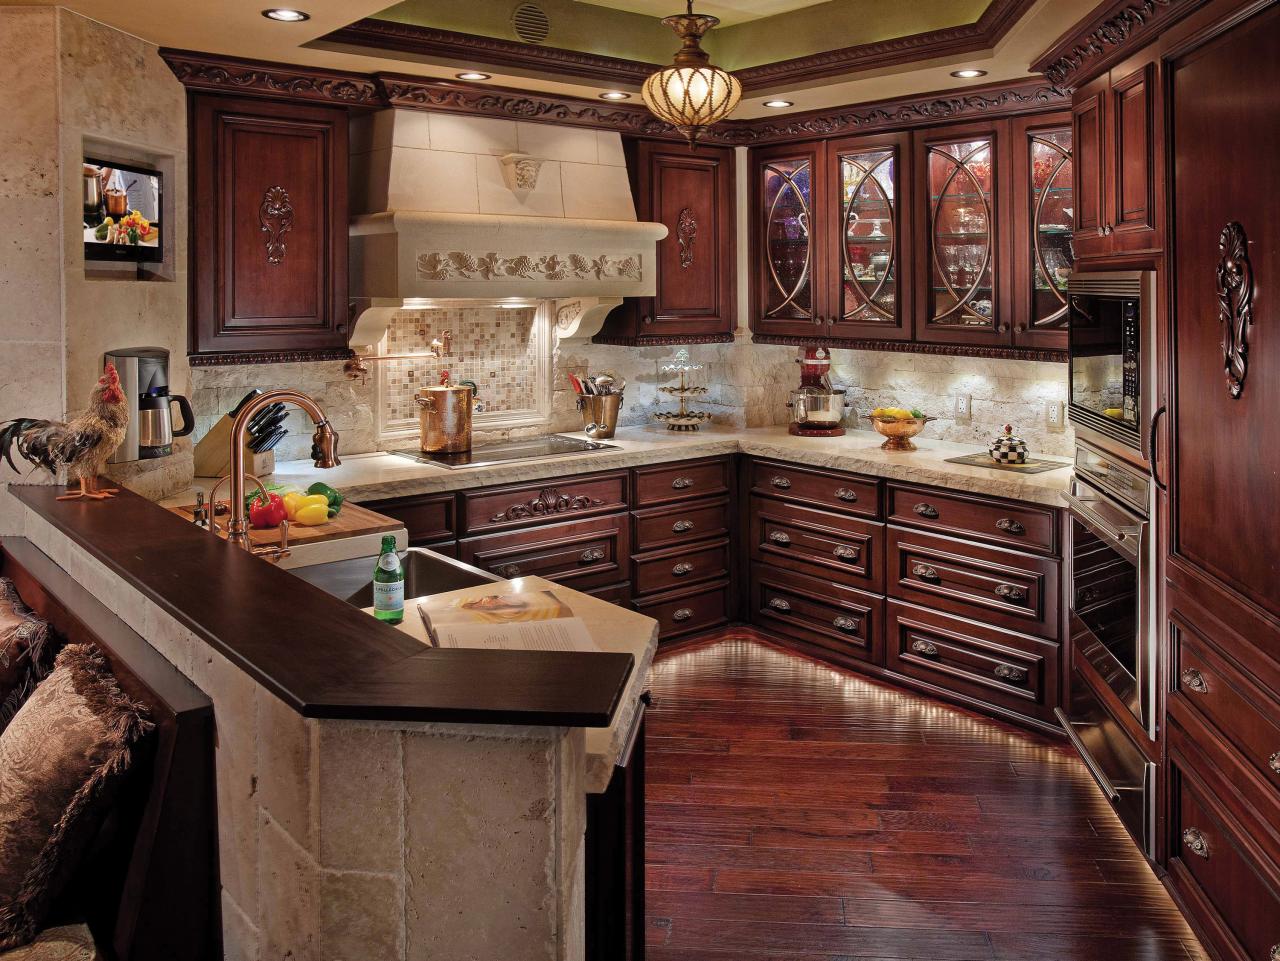 Cherry Kitchen Cabinets: Pictures, Options, Tips & Ideas ...